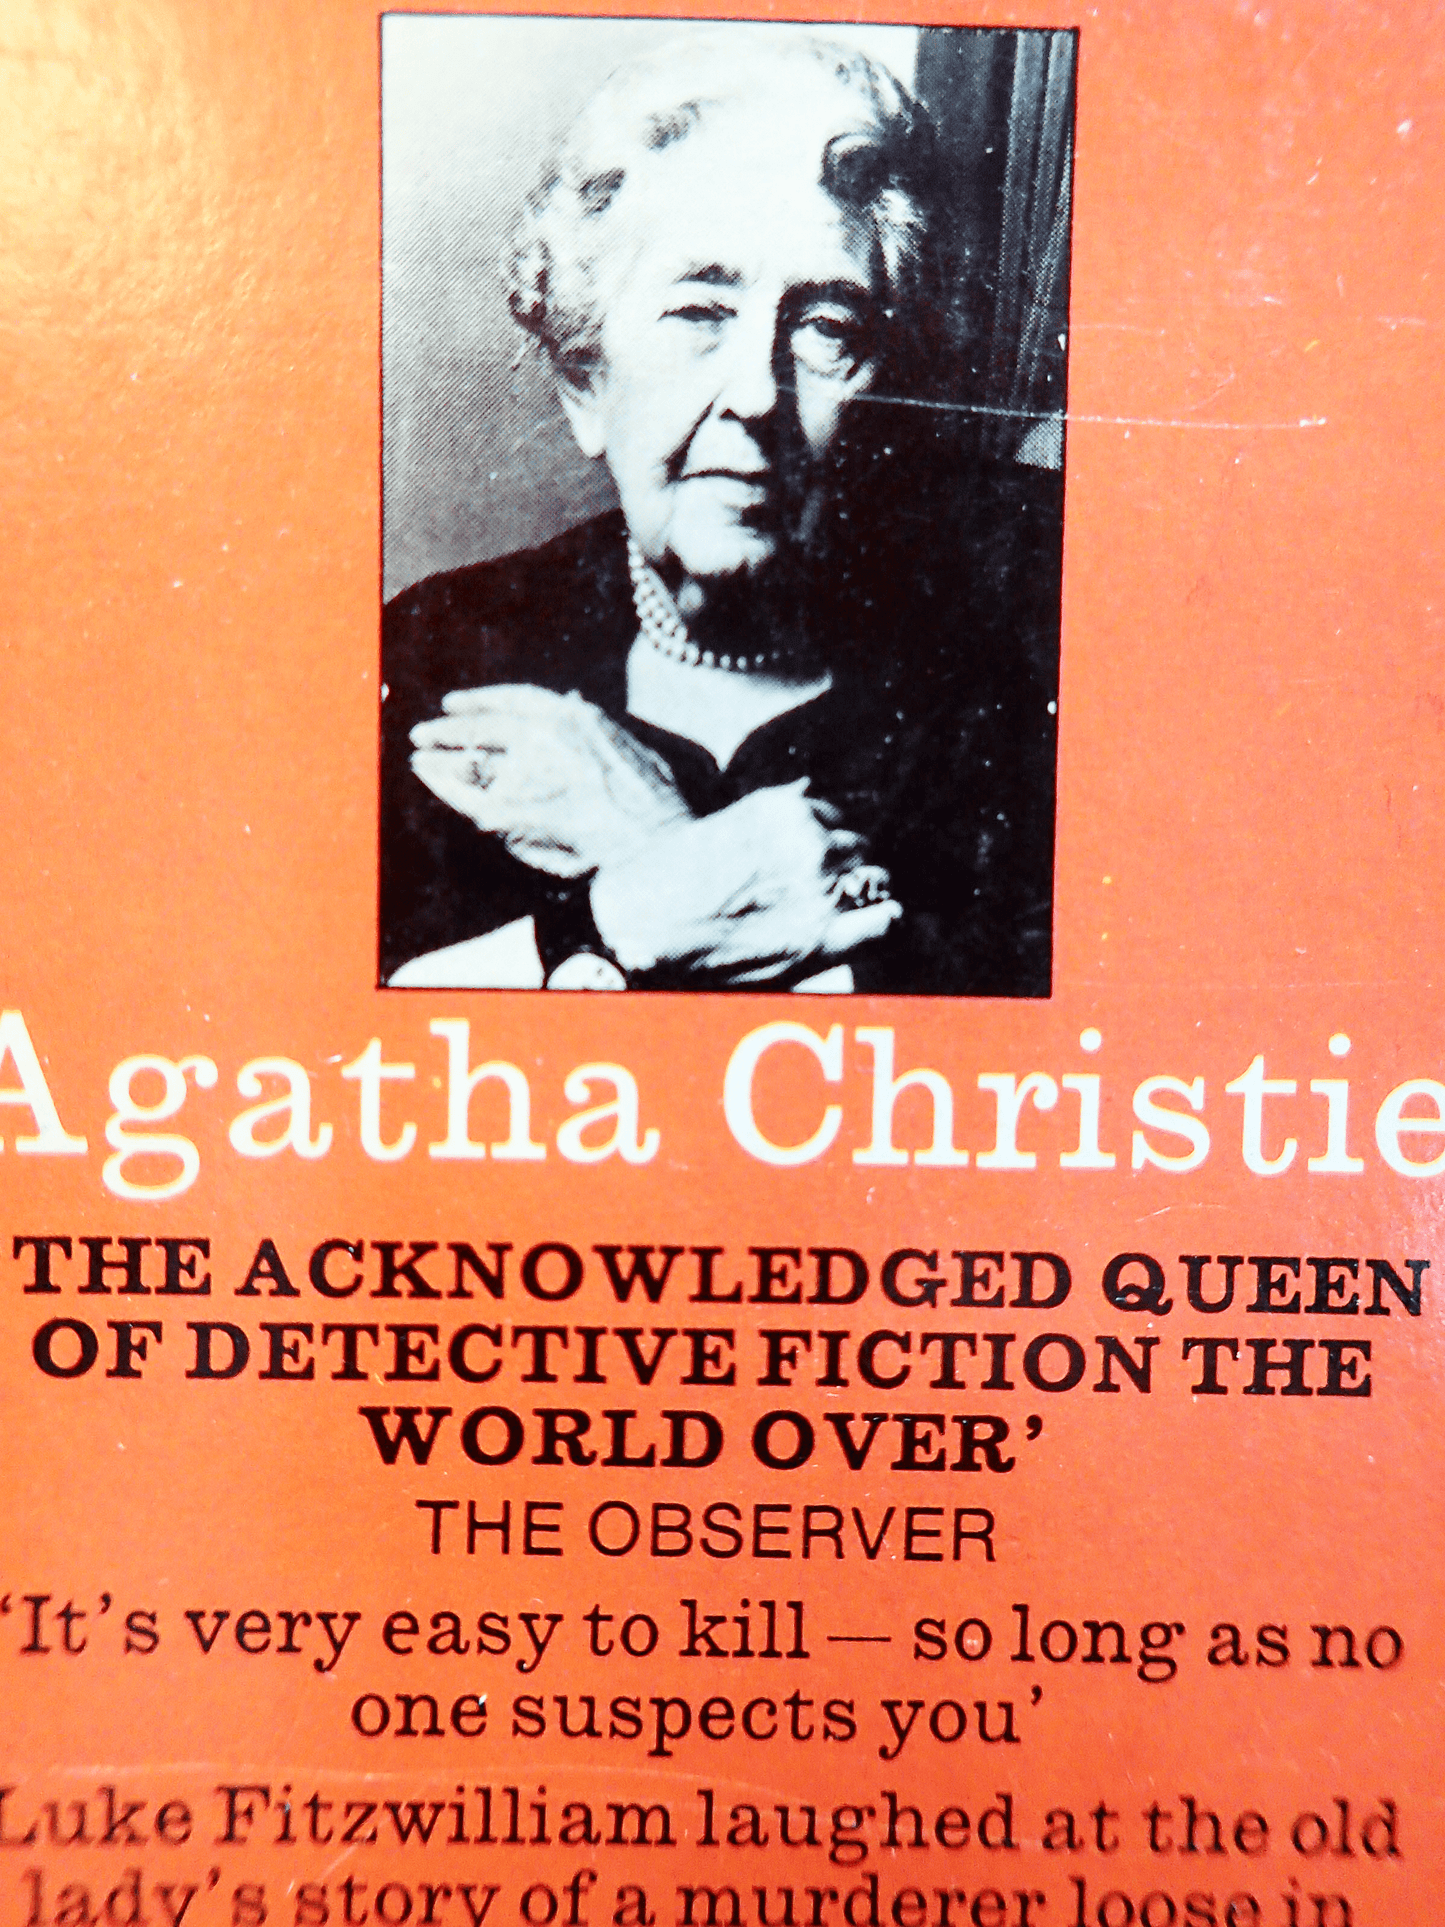 Agatha Christie Murder is Easy back cover of Vintage Pan Paperback showing a black and white photo of Agatha Christie with blurb about the book.. Classic Crime book.